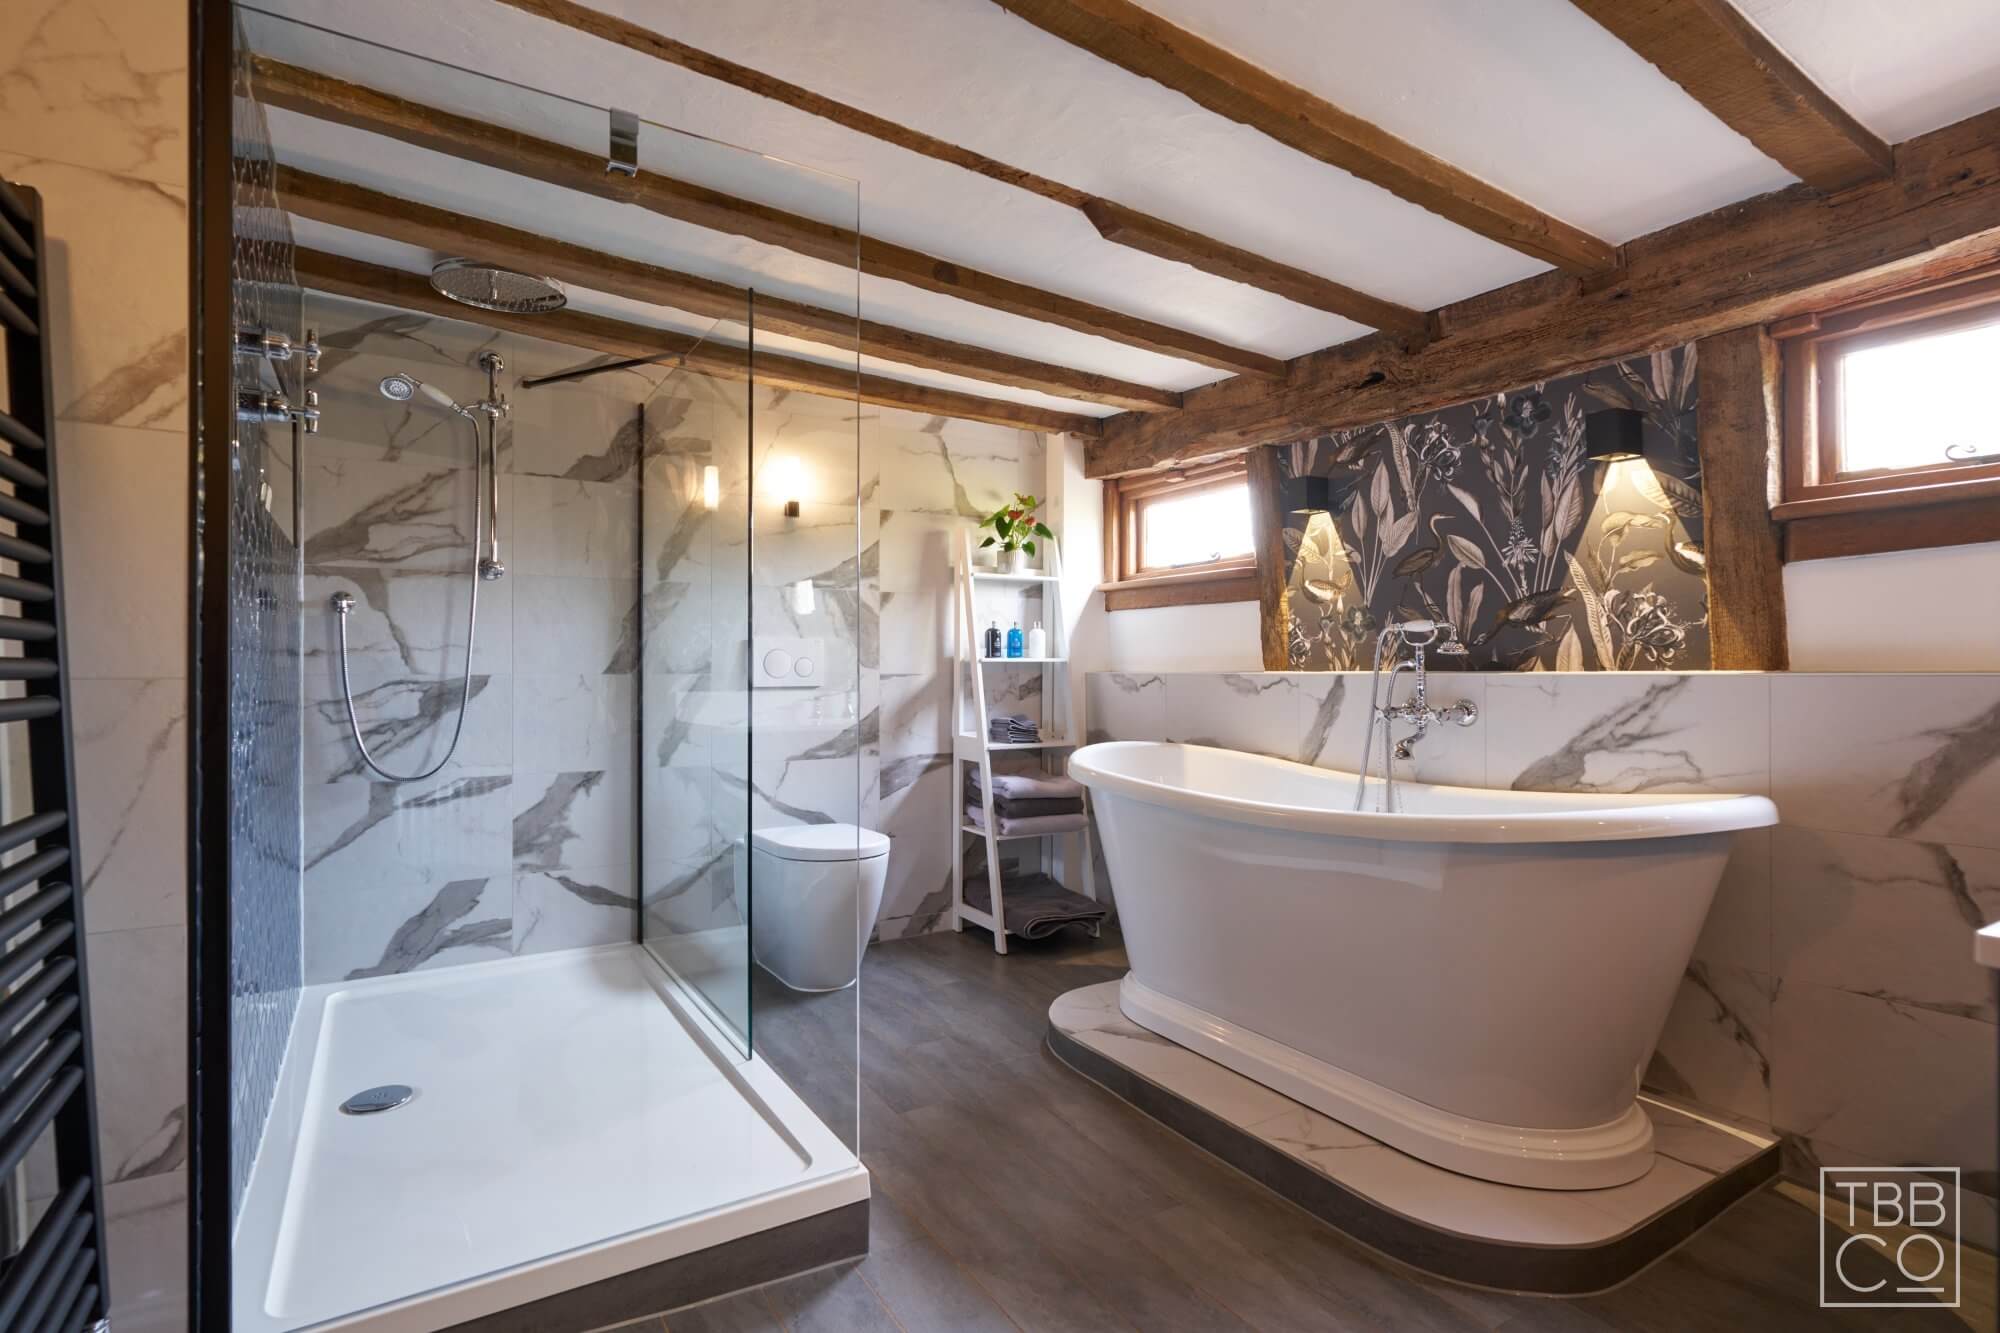 Bathroom Design with Boat Bath on Plinth with feature wallpaper